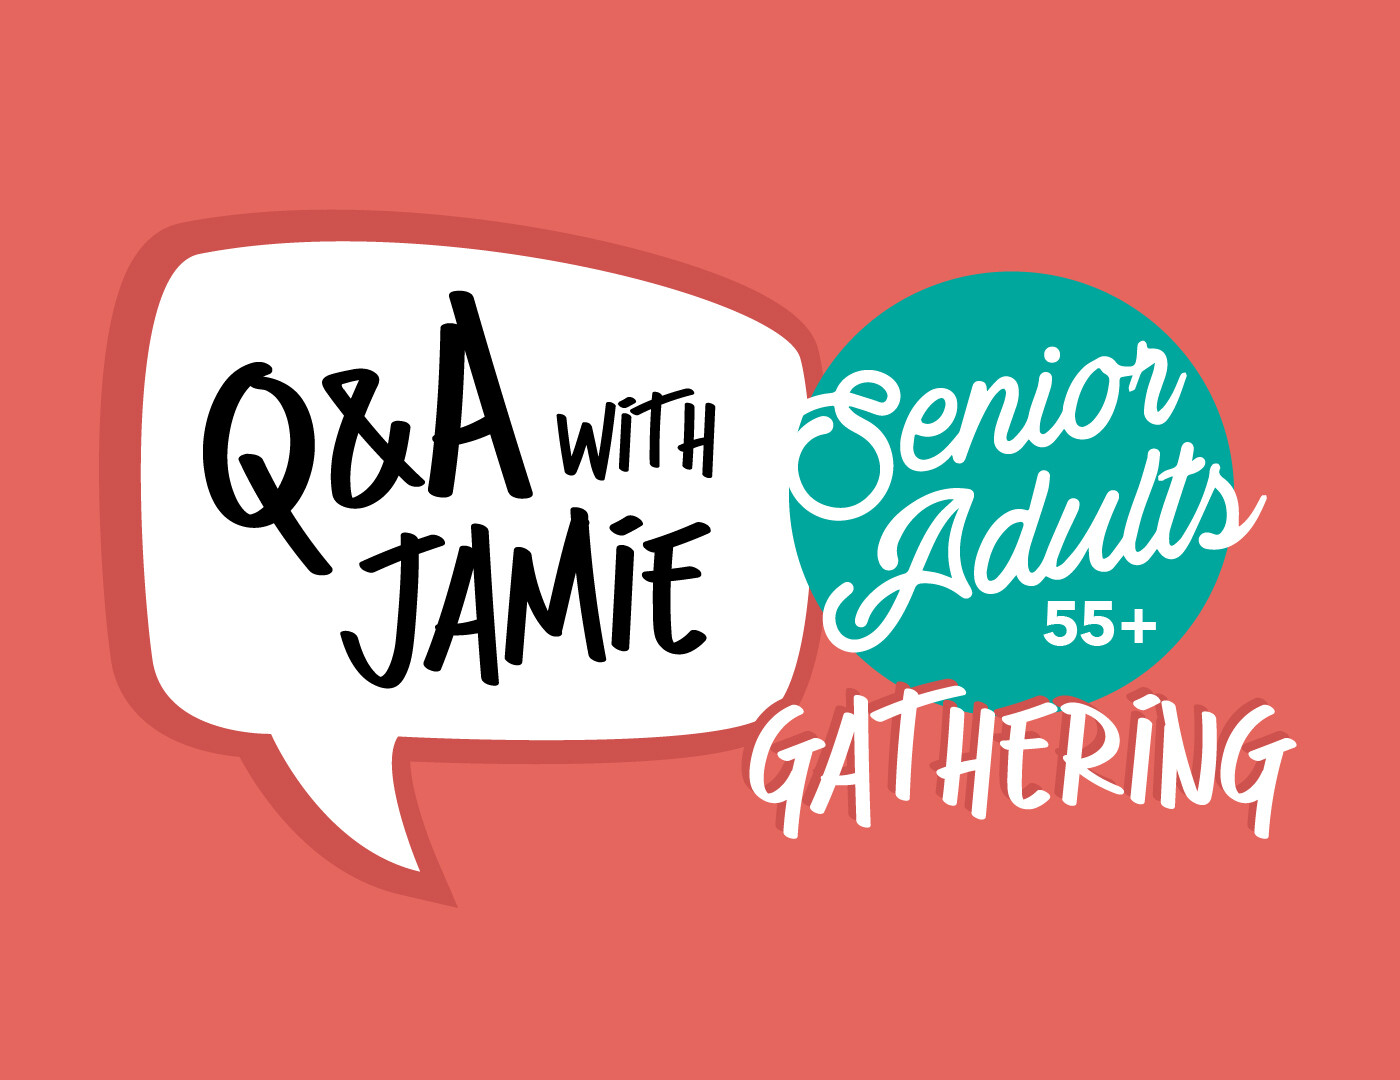 Senior Adults 55+ Gathering: Q&A with Jamie Thompson